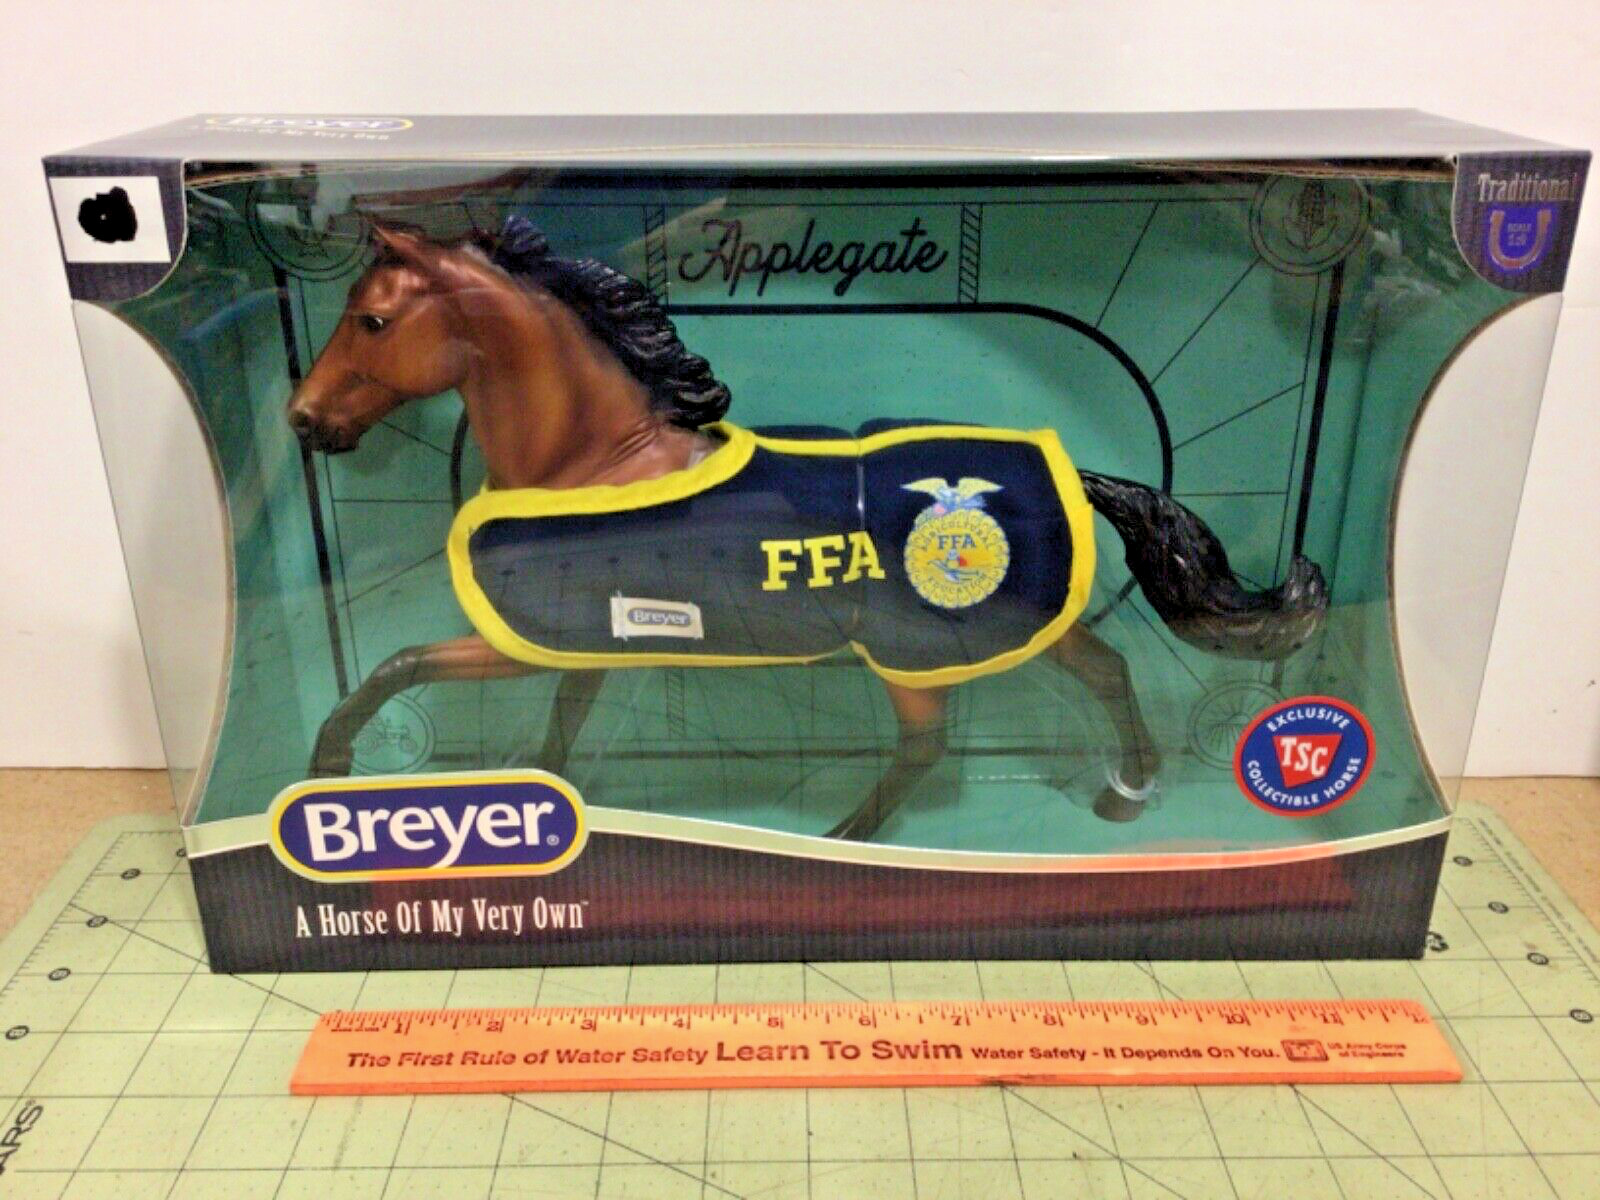 Breyer TSC Exclusive Applegate FFA Horse Limited Edition 1:9 scale 301192